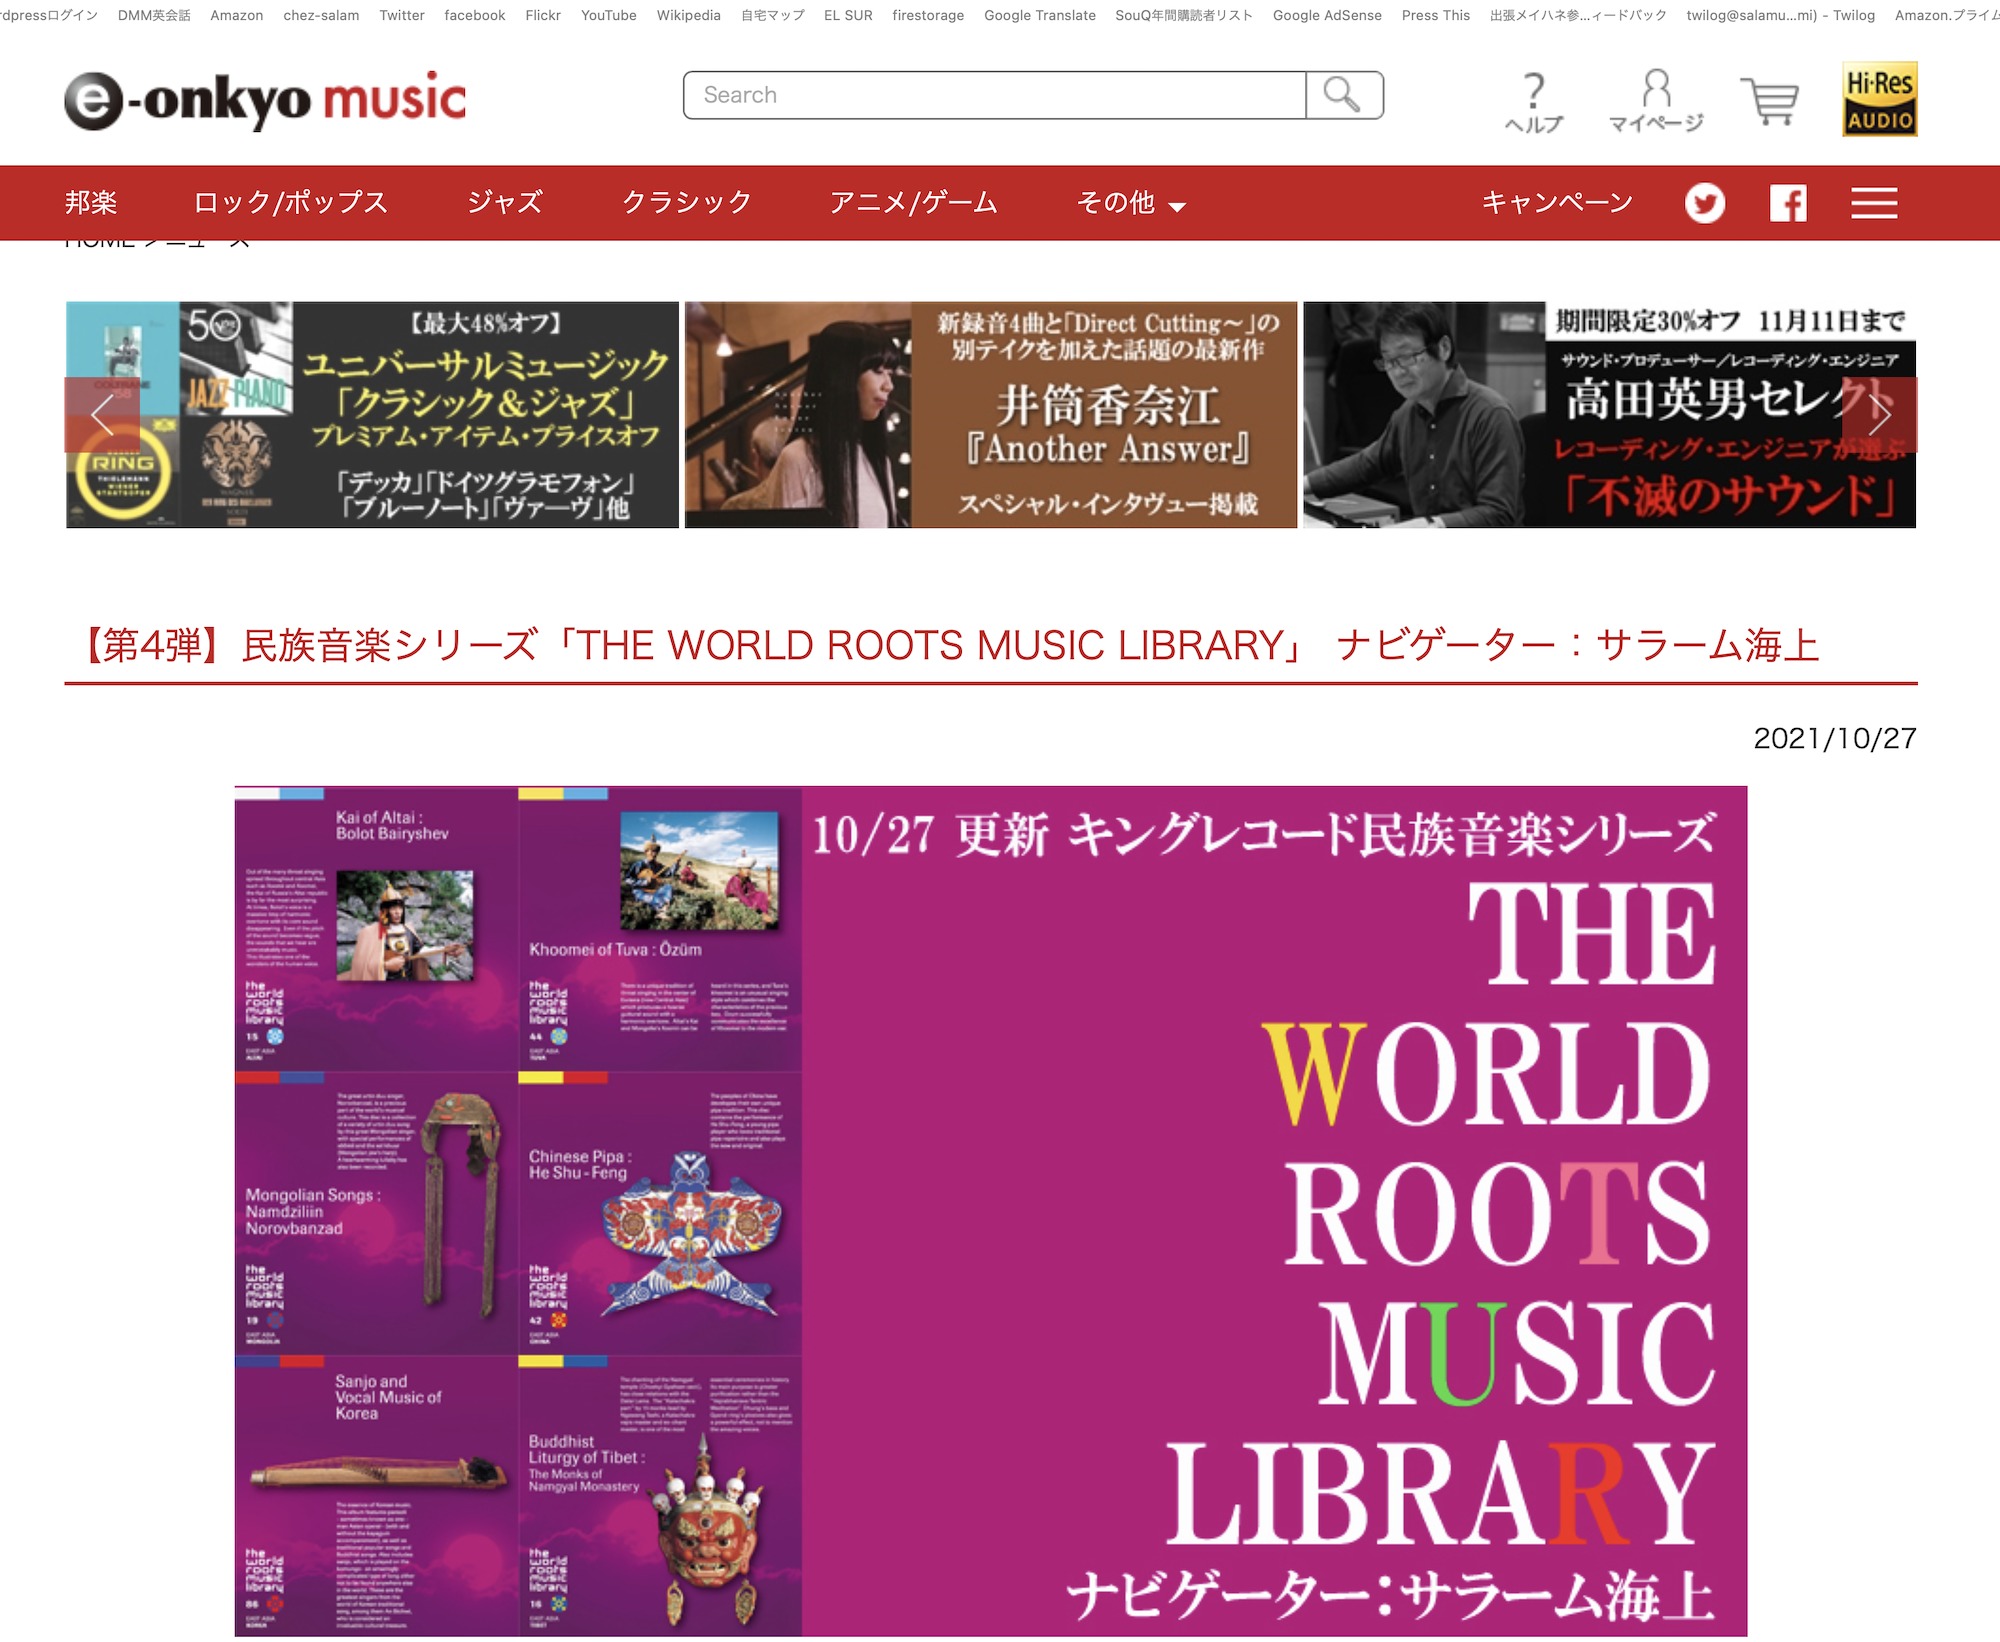 THE WORLD ROOTS MUSIC LIBRARY on e-onkyo vol.4